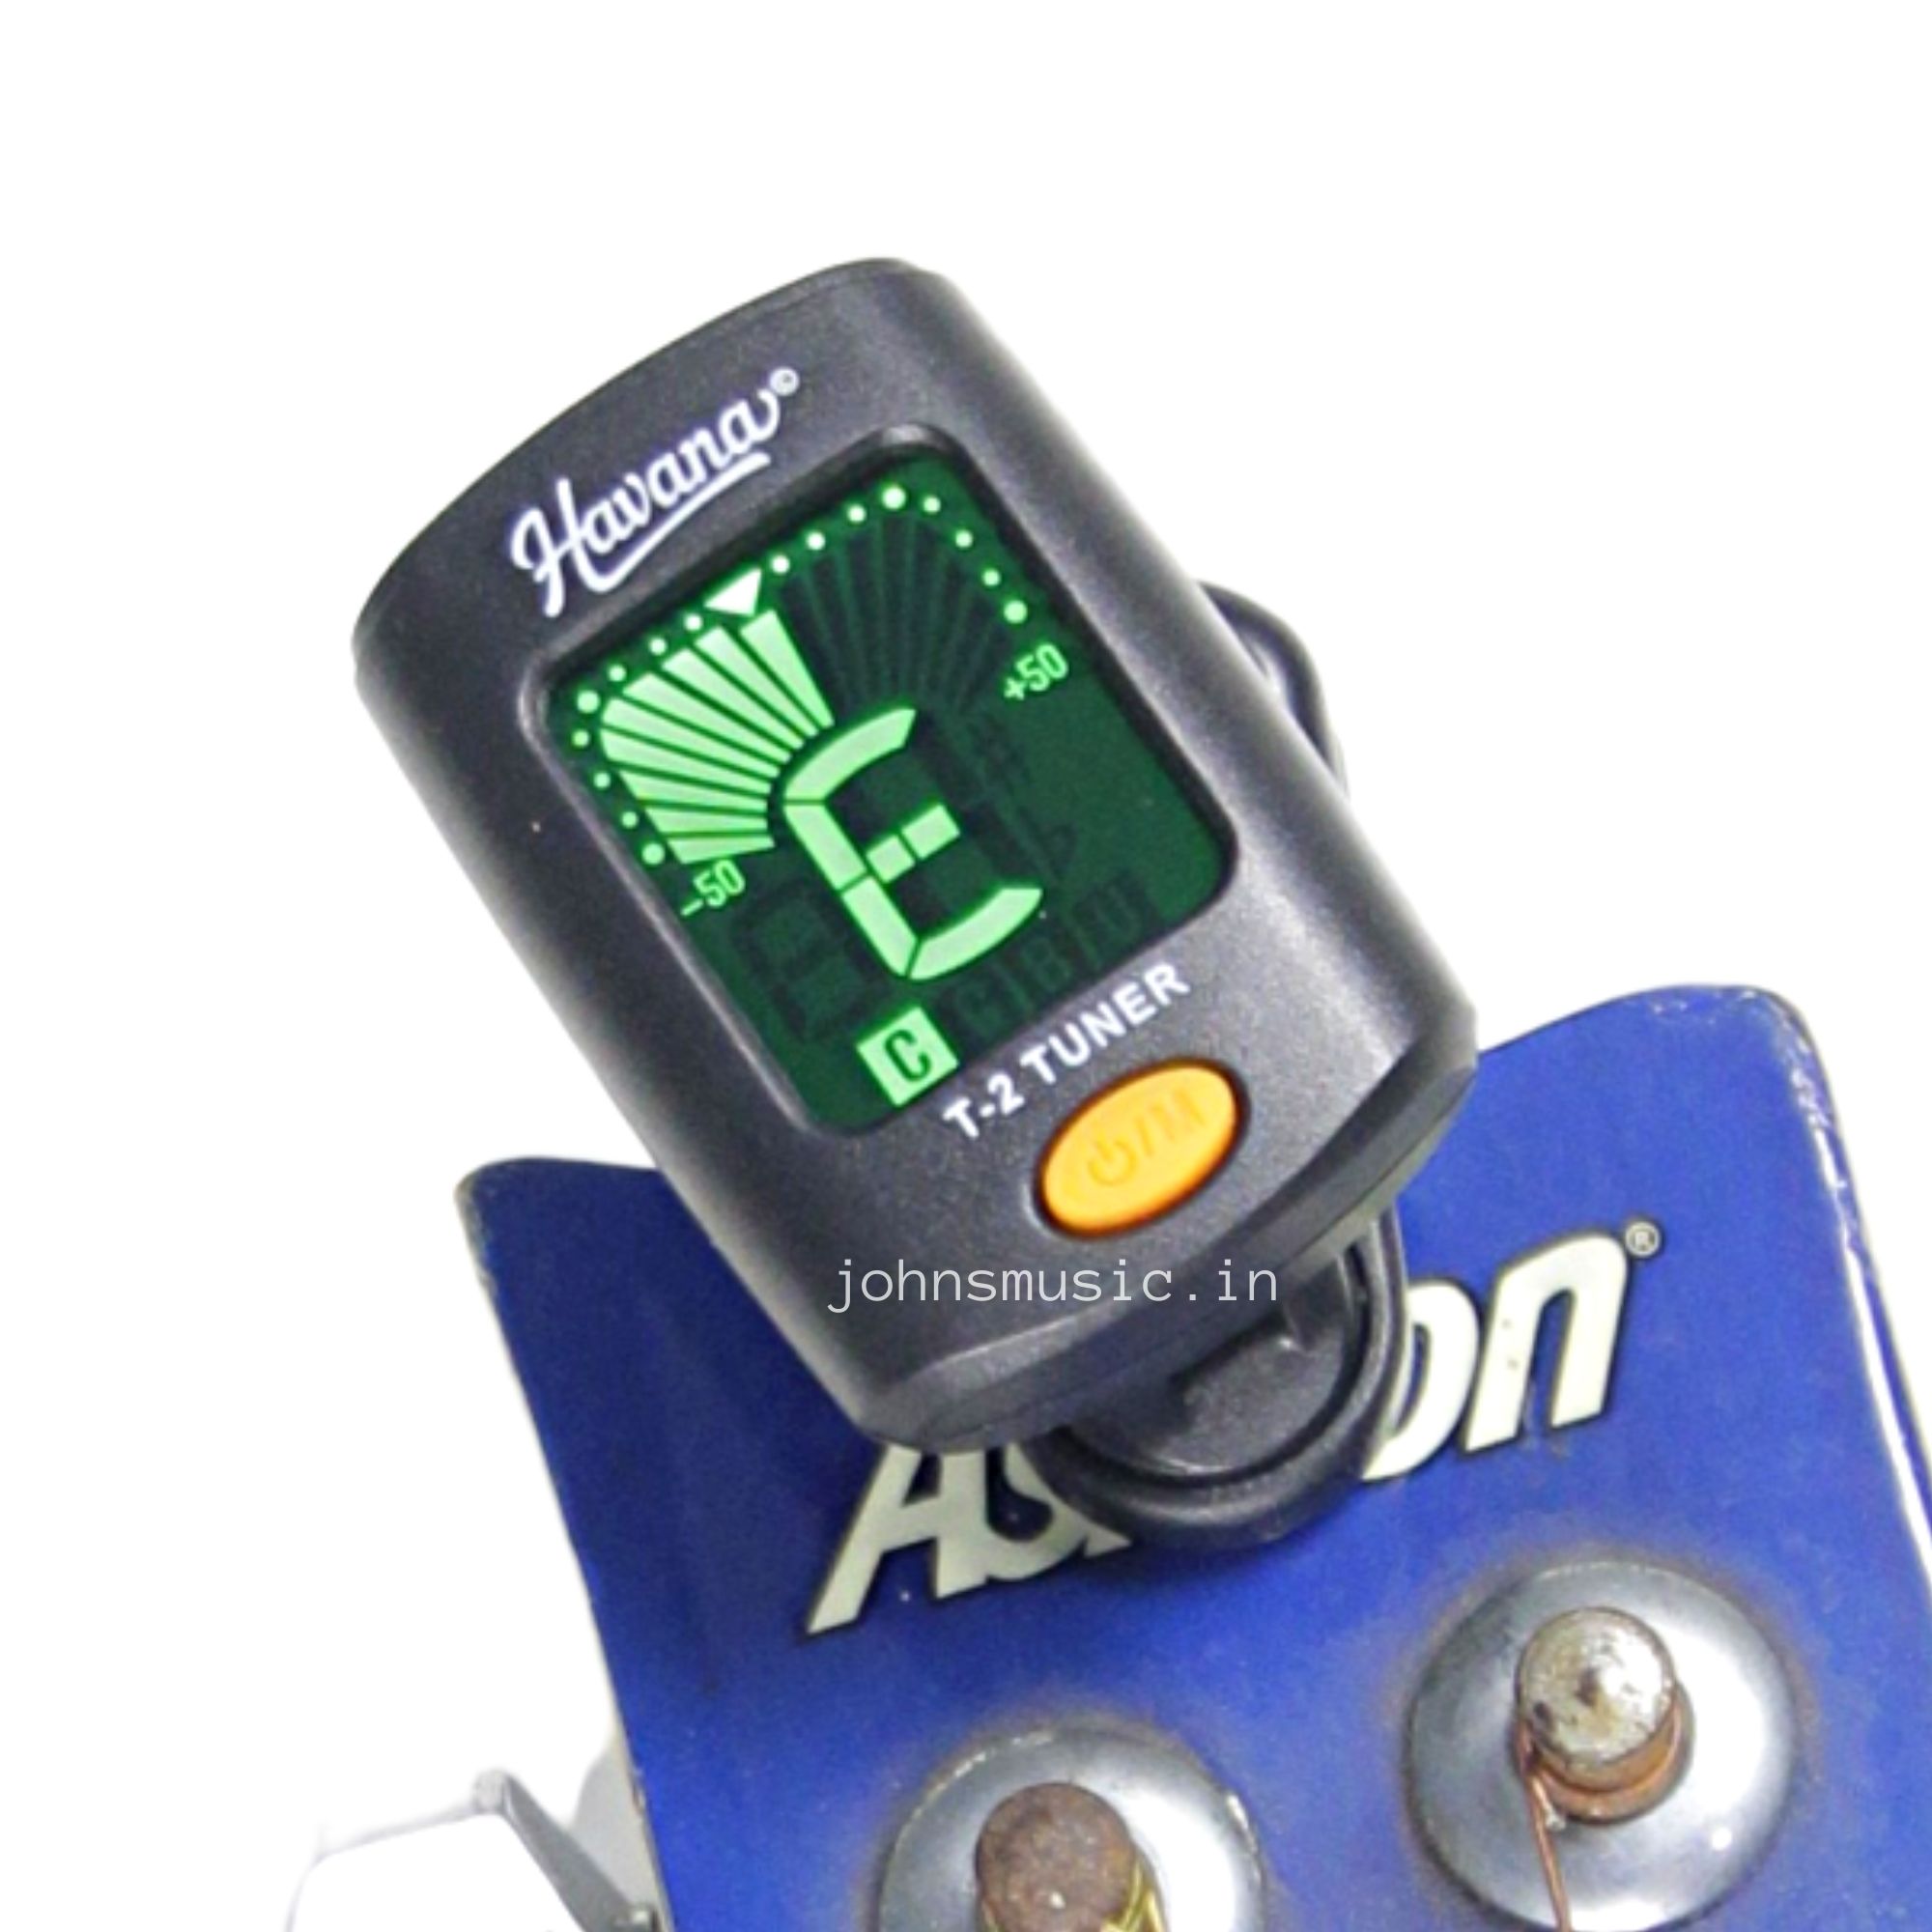 Cheapest guitar tuner in india